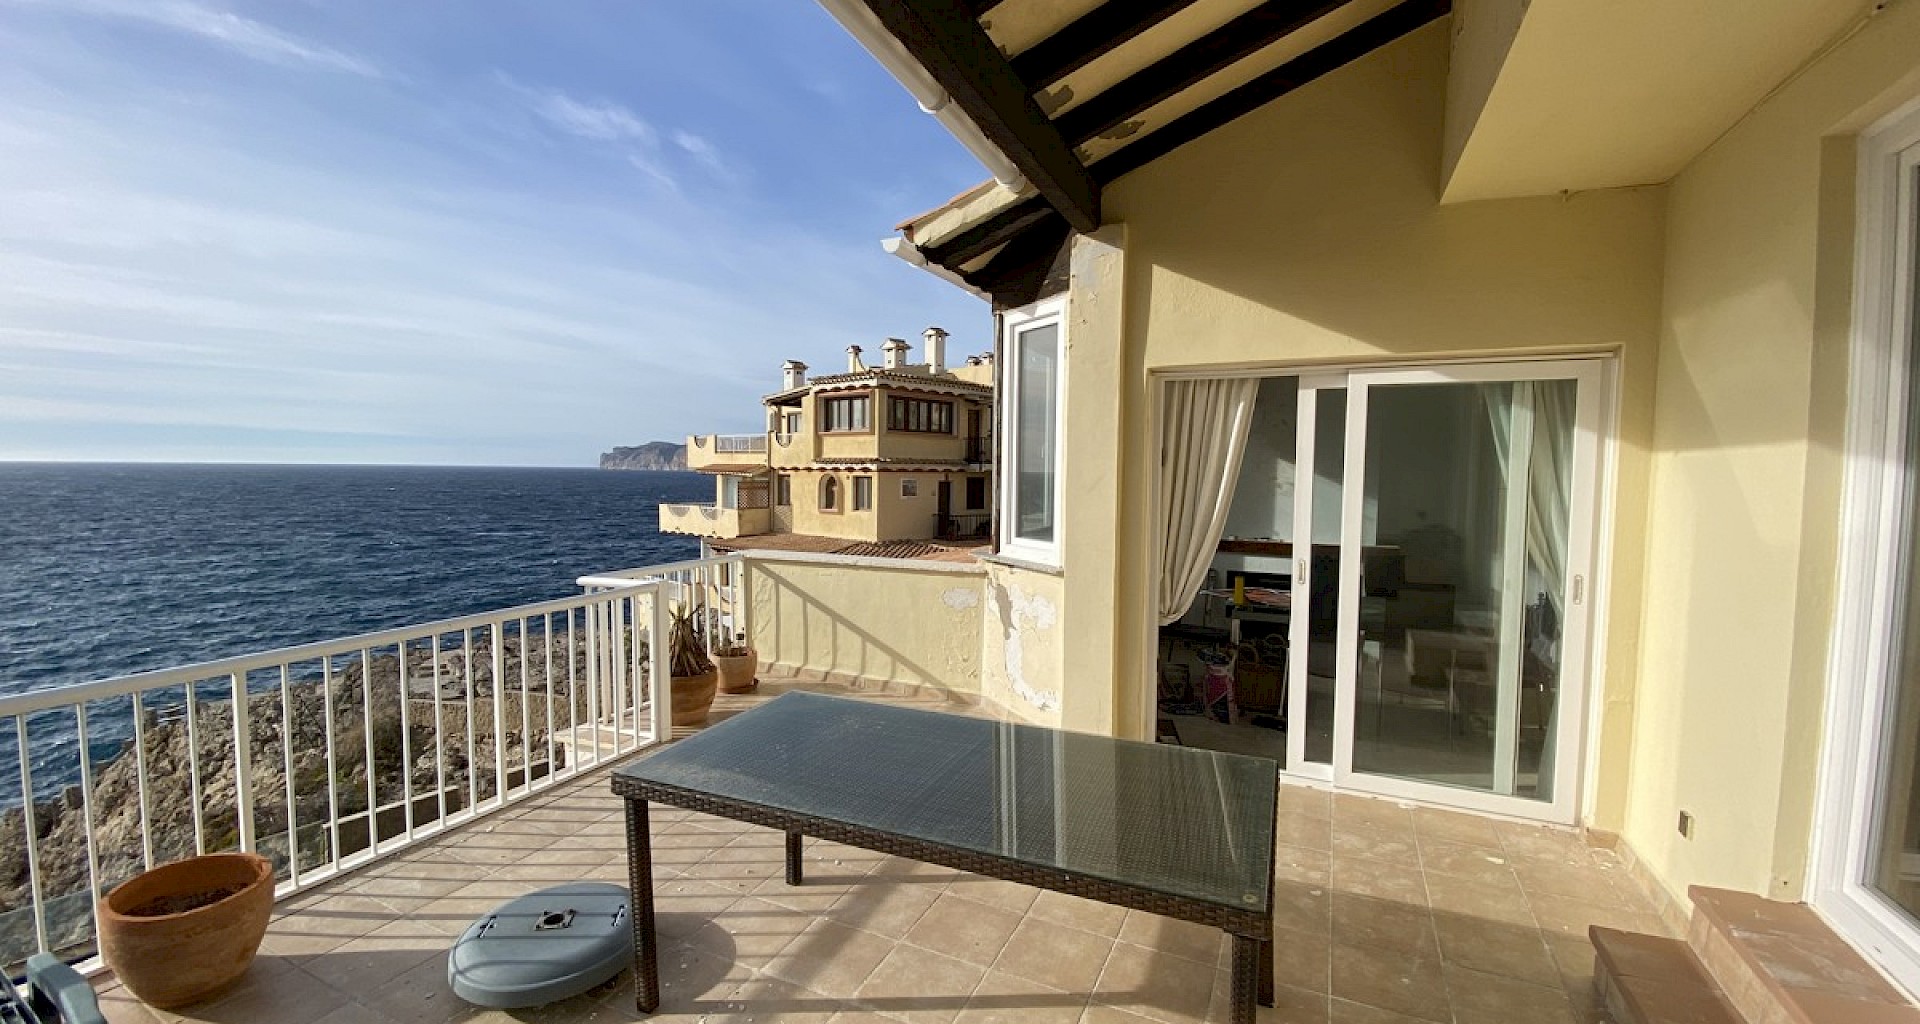 KROHN & LUEDEMANN Apartment  in first line to the sea in Santa Ponsa to buy as investment opportunity Santa Ponsa erste Meerslinie Apartment